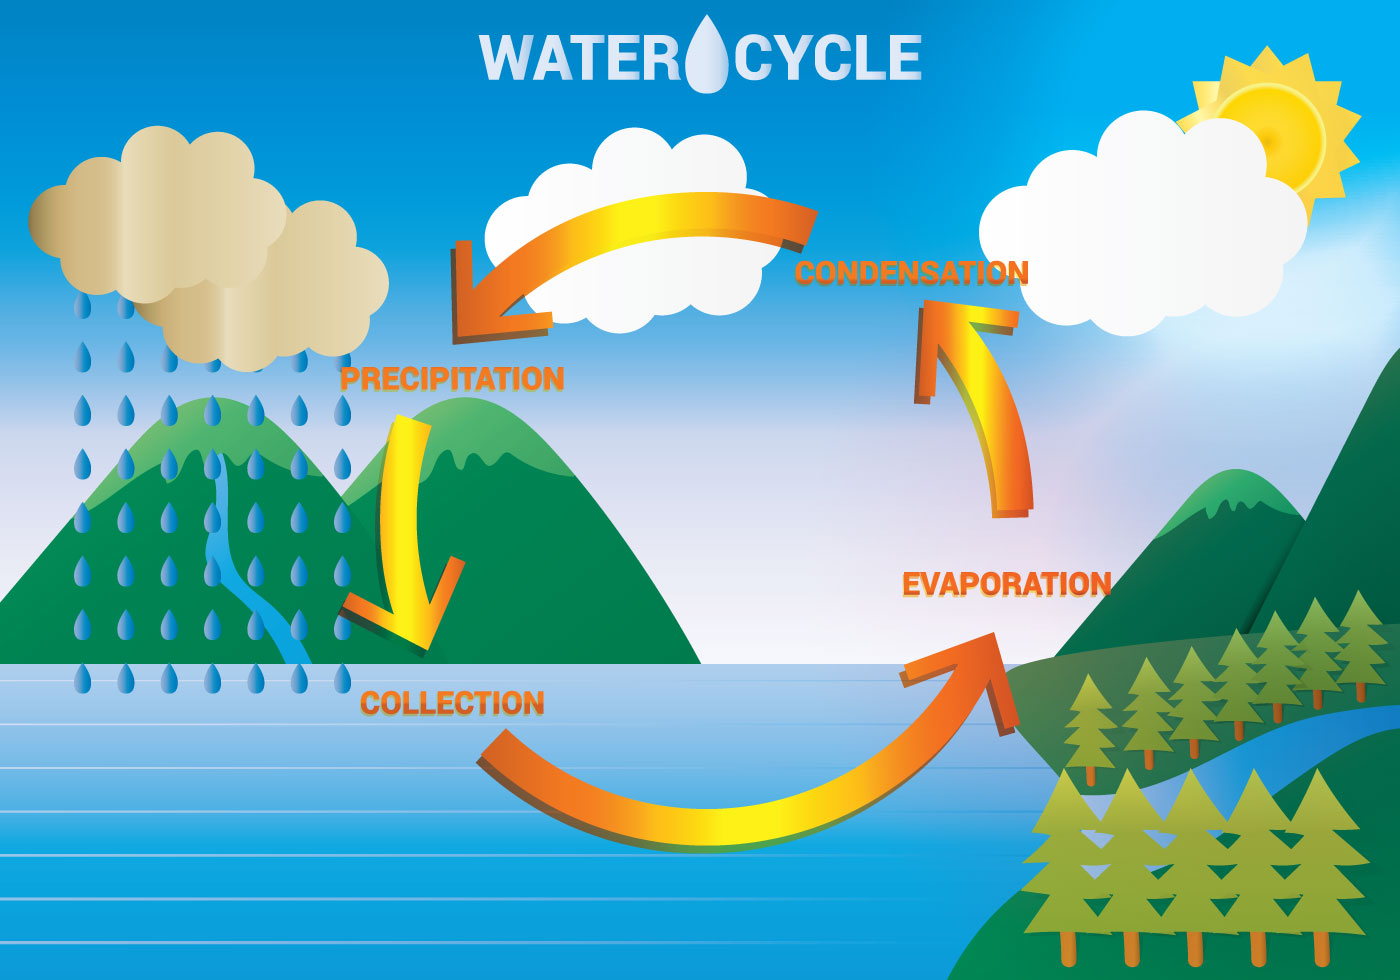 Draw the diagram showing water cycle